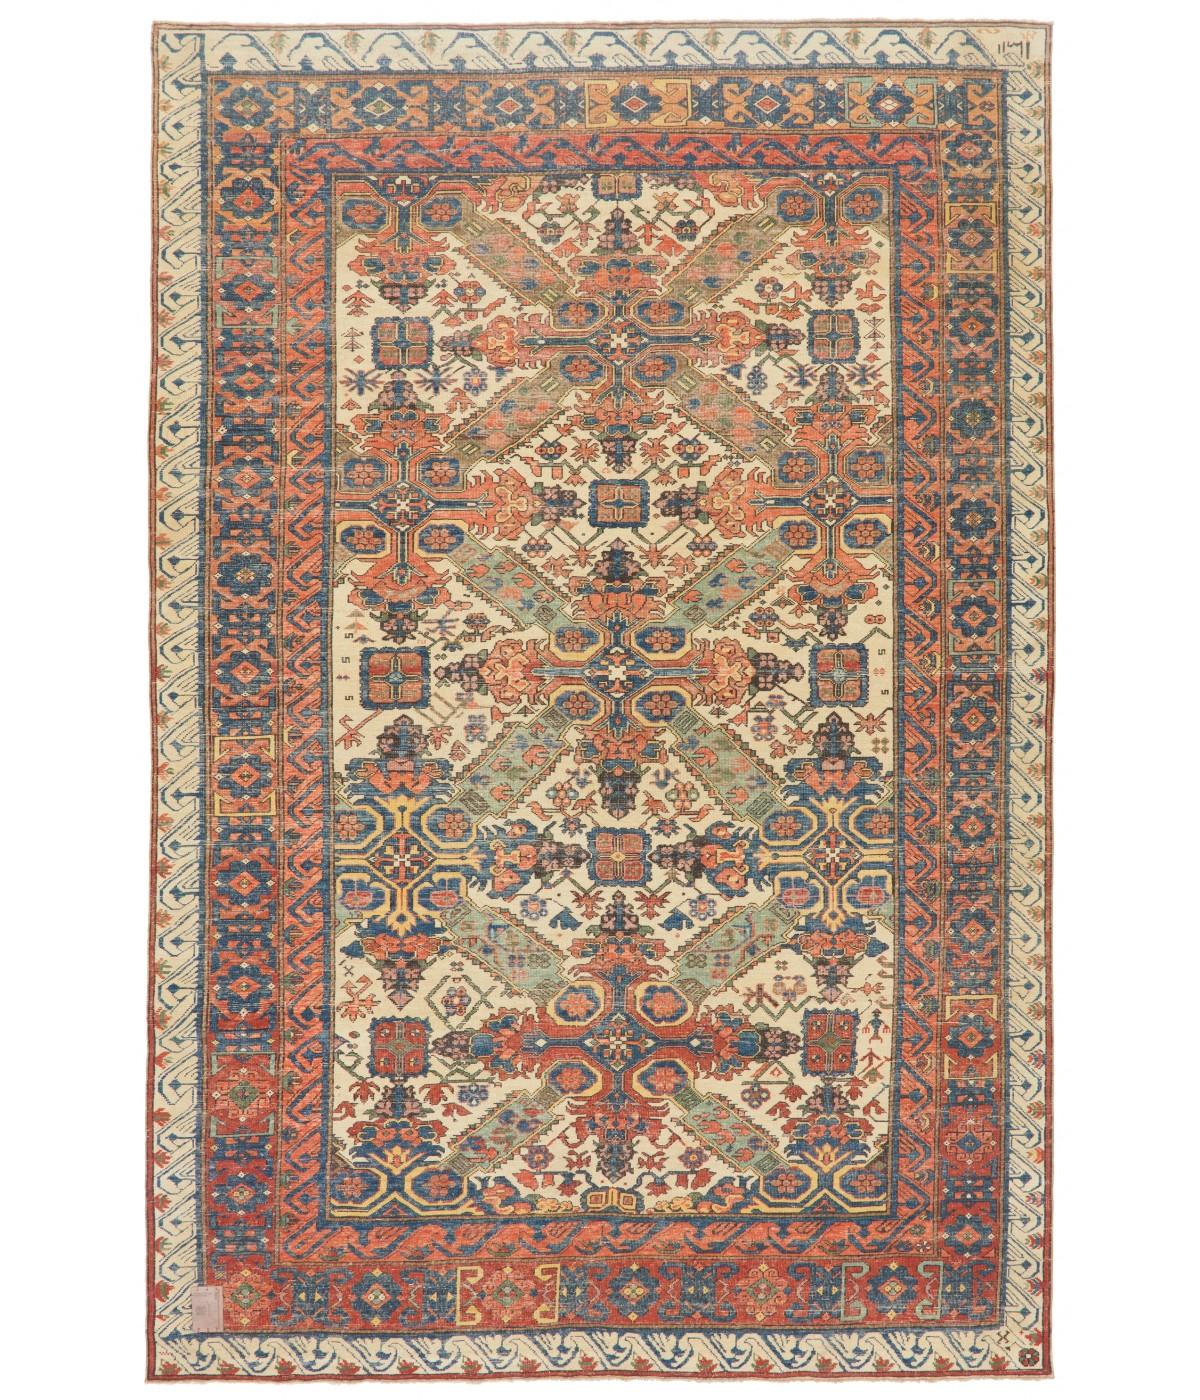 The source of the rug comes from the book Tapis du Caucase - Rugs of the Caucasus, Ian Bennett & Aziz Bassoul, The Nicholas Sursock Museum, Beirut, Lebanon 2003, nr.90 and Oriental Rugs Volume 1 Caucasian, Ian Bennett, Oriental Textile Press,